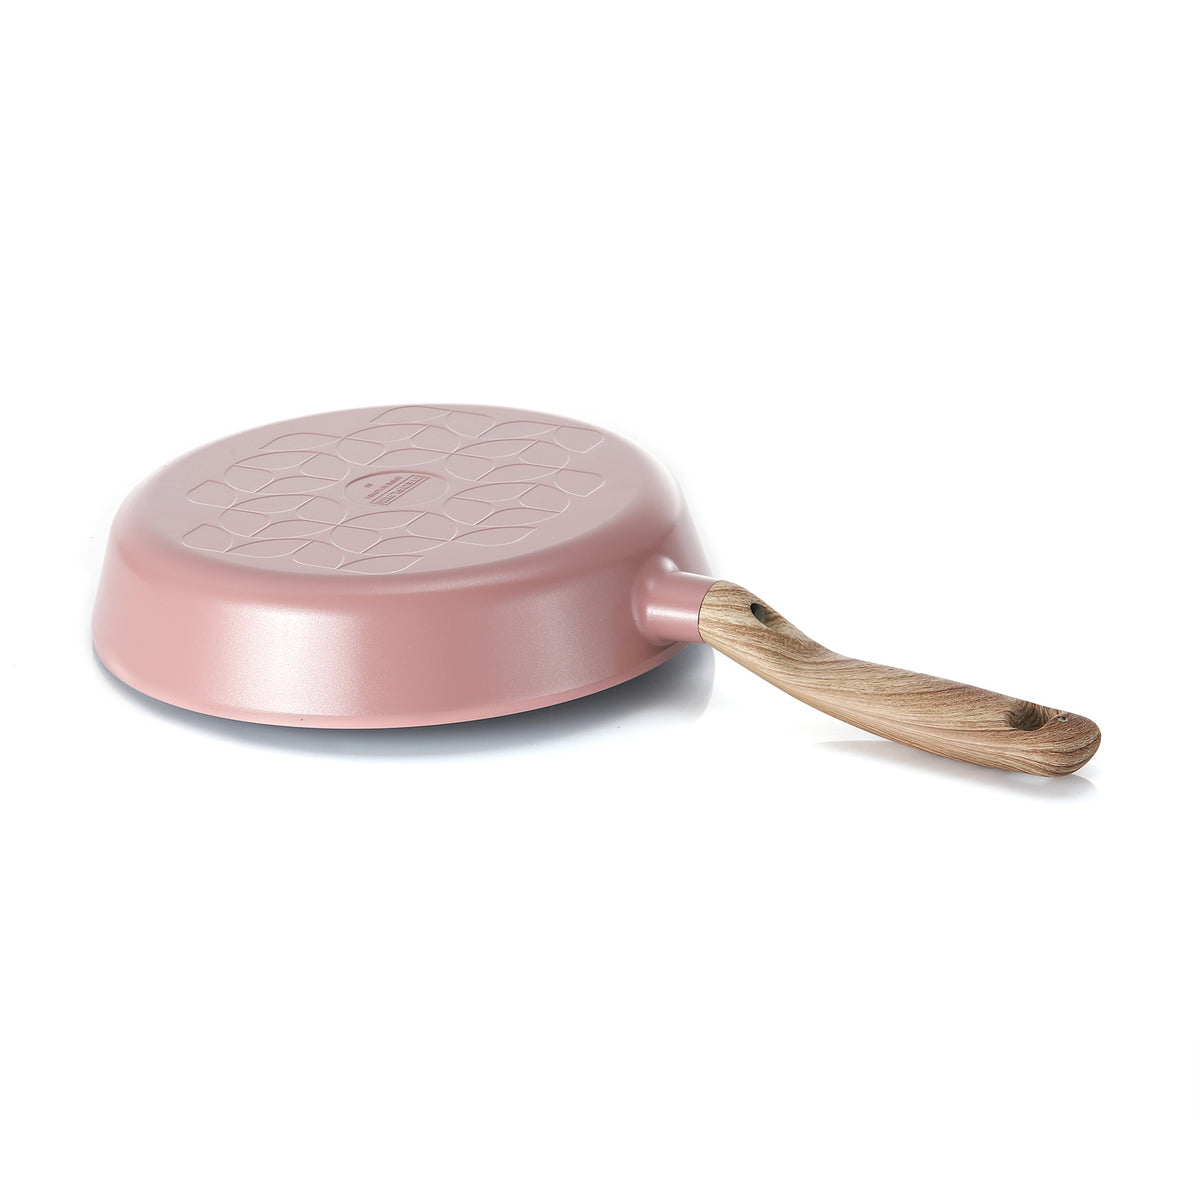 Neoflam Retro 24cm Fry Pan Induction Pink Demer